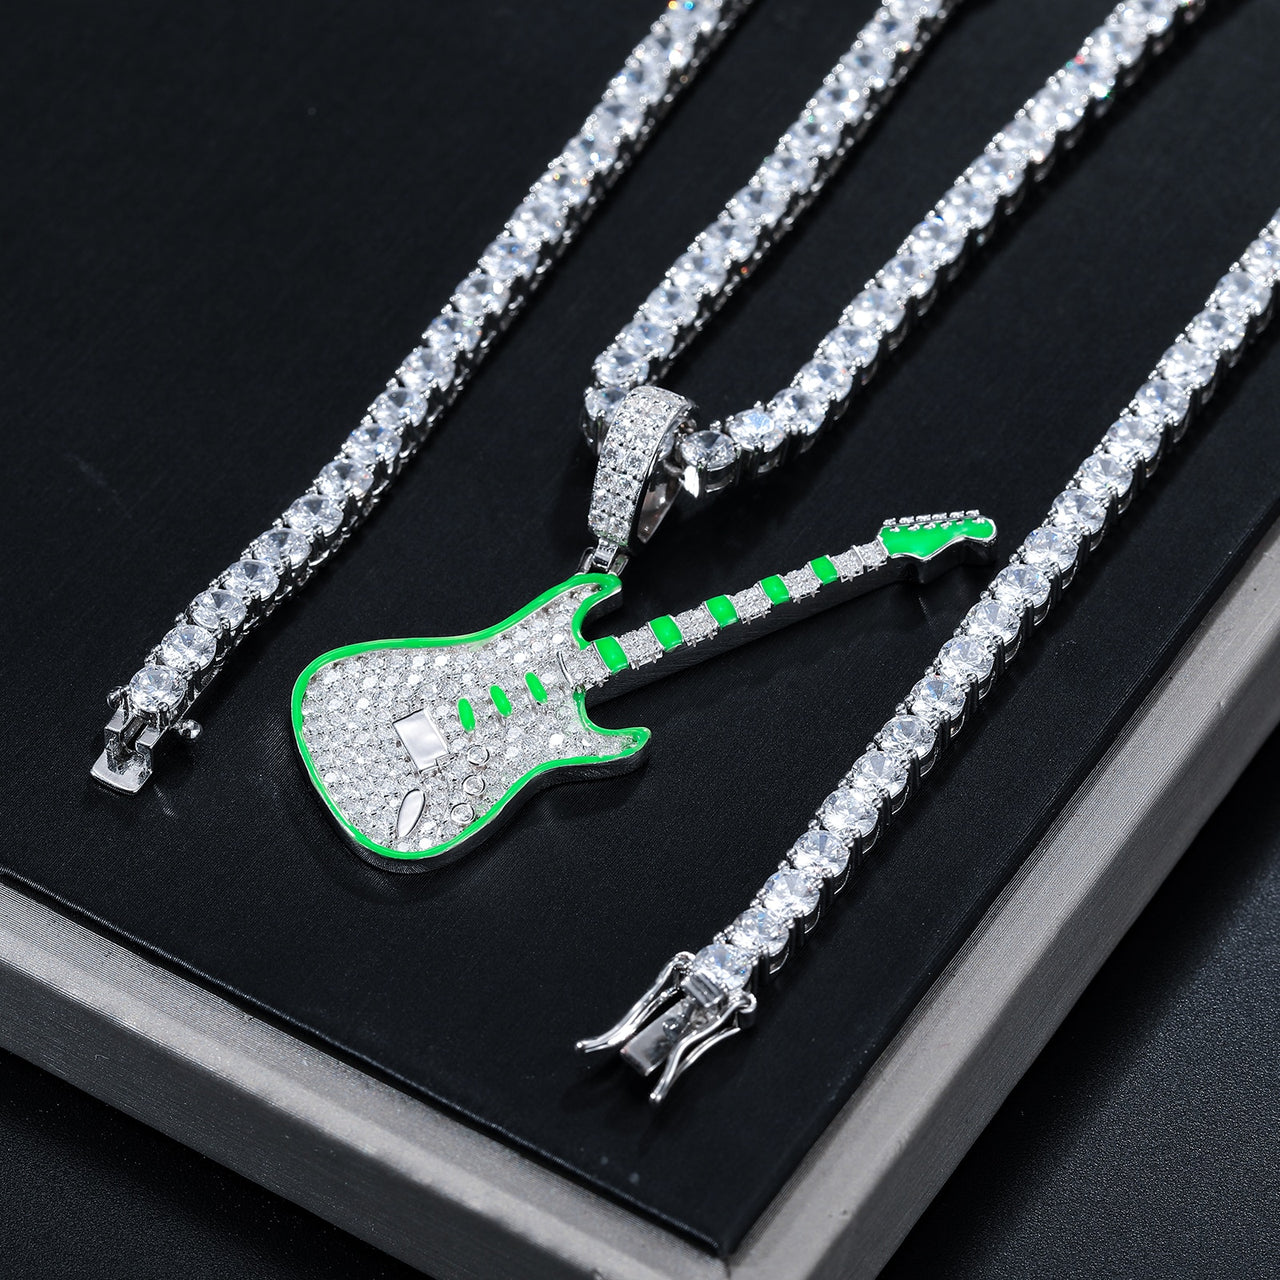 S925 Moissanite Glow In The Dark Guitar Pendant - Different Drips